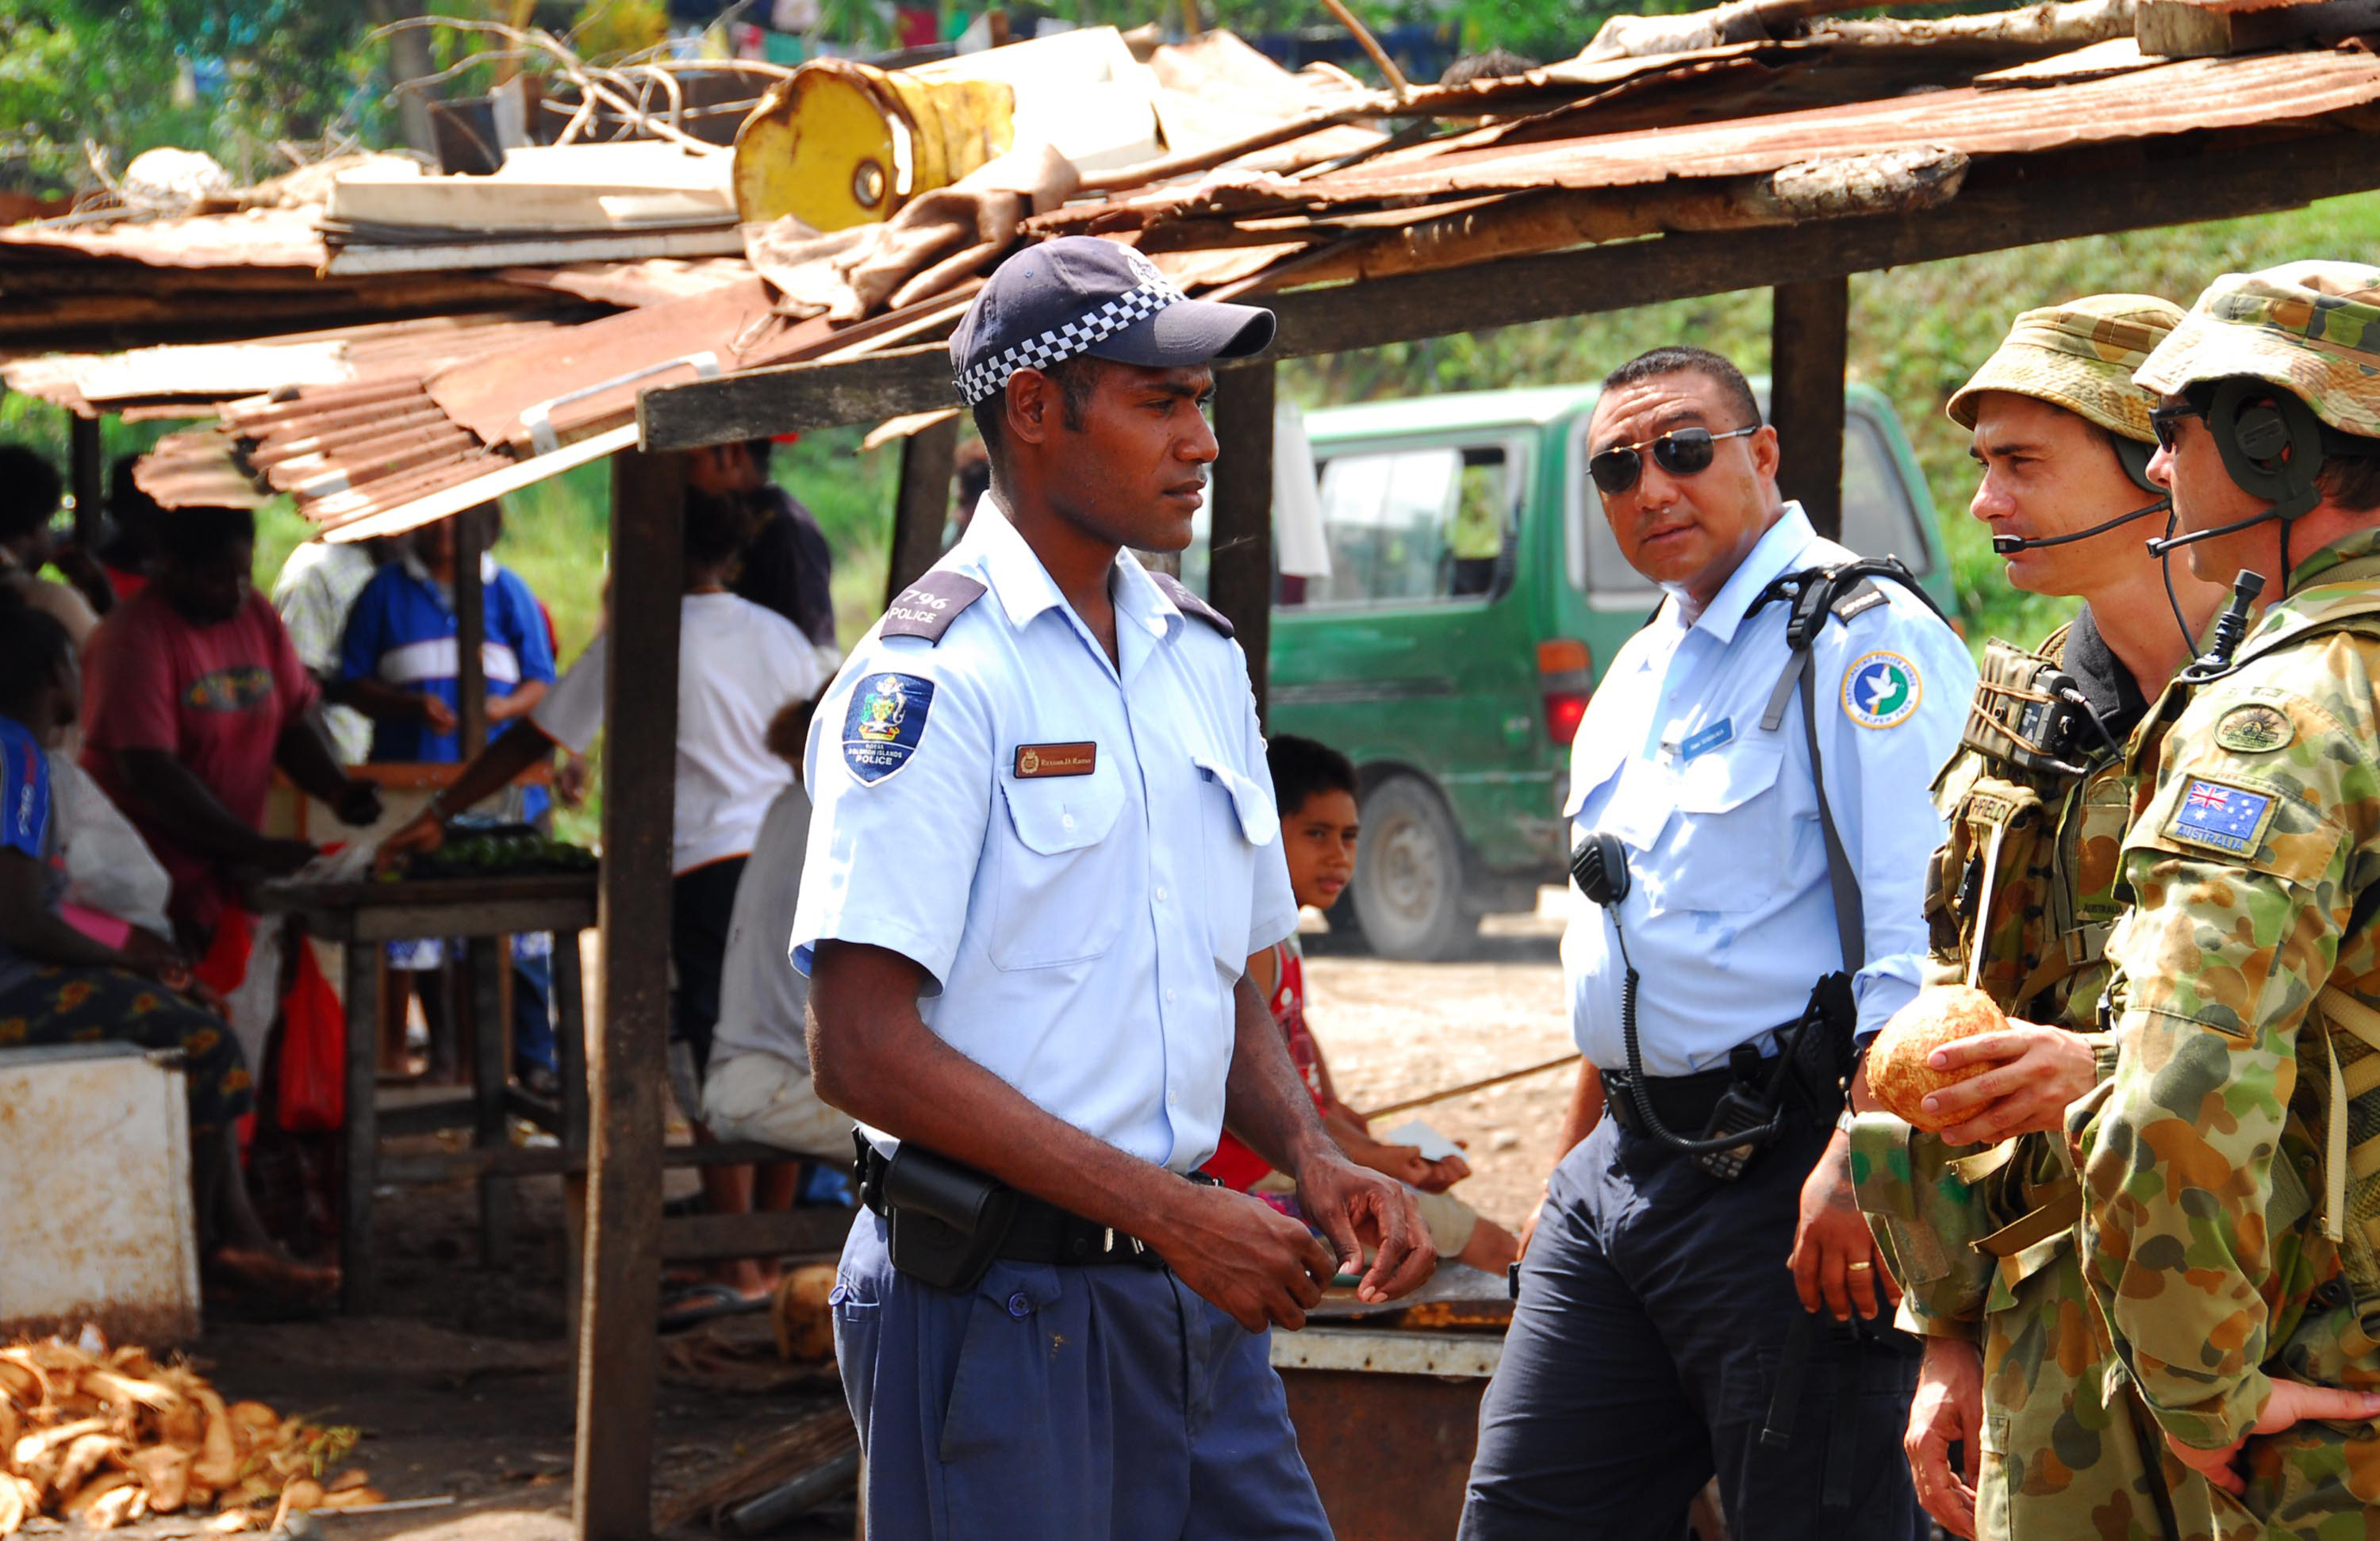 Soldiers from 7 Section conduct regular patrols throughout the local areas of Honiara. Greeting the local Solomon Islanders and working closely with the Participation Police Force (PPF- Solomon Island Police Force) to help maintain security to the community. 